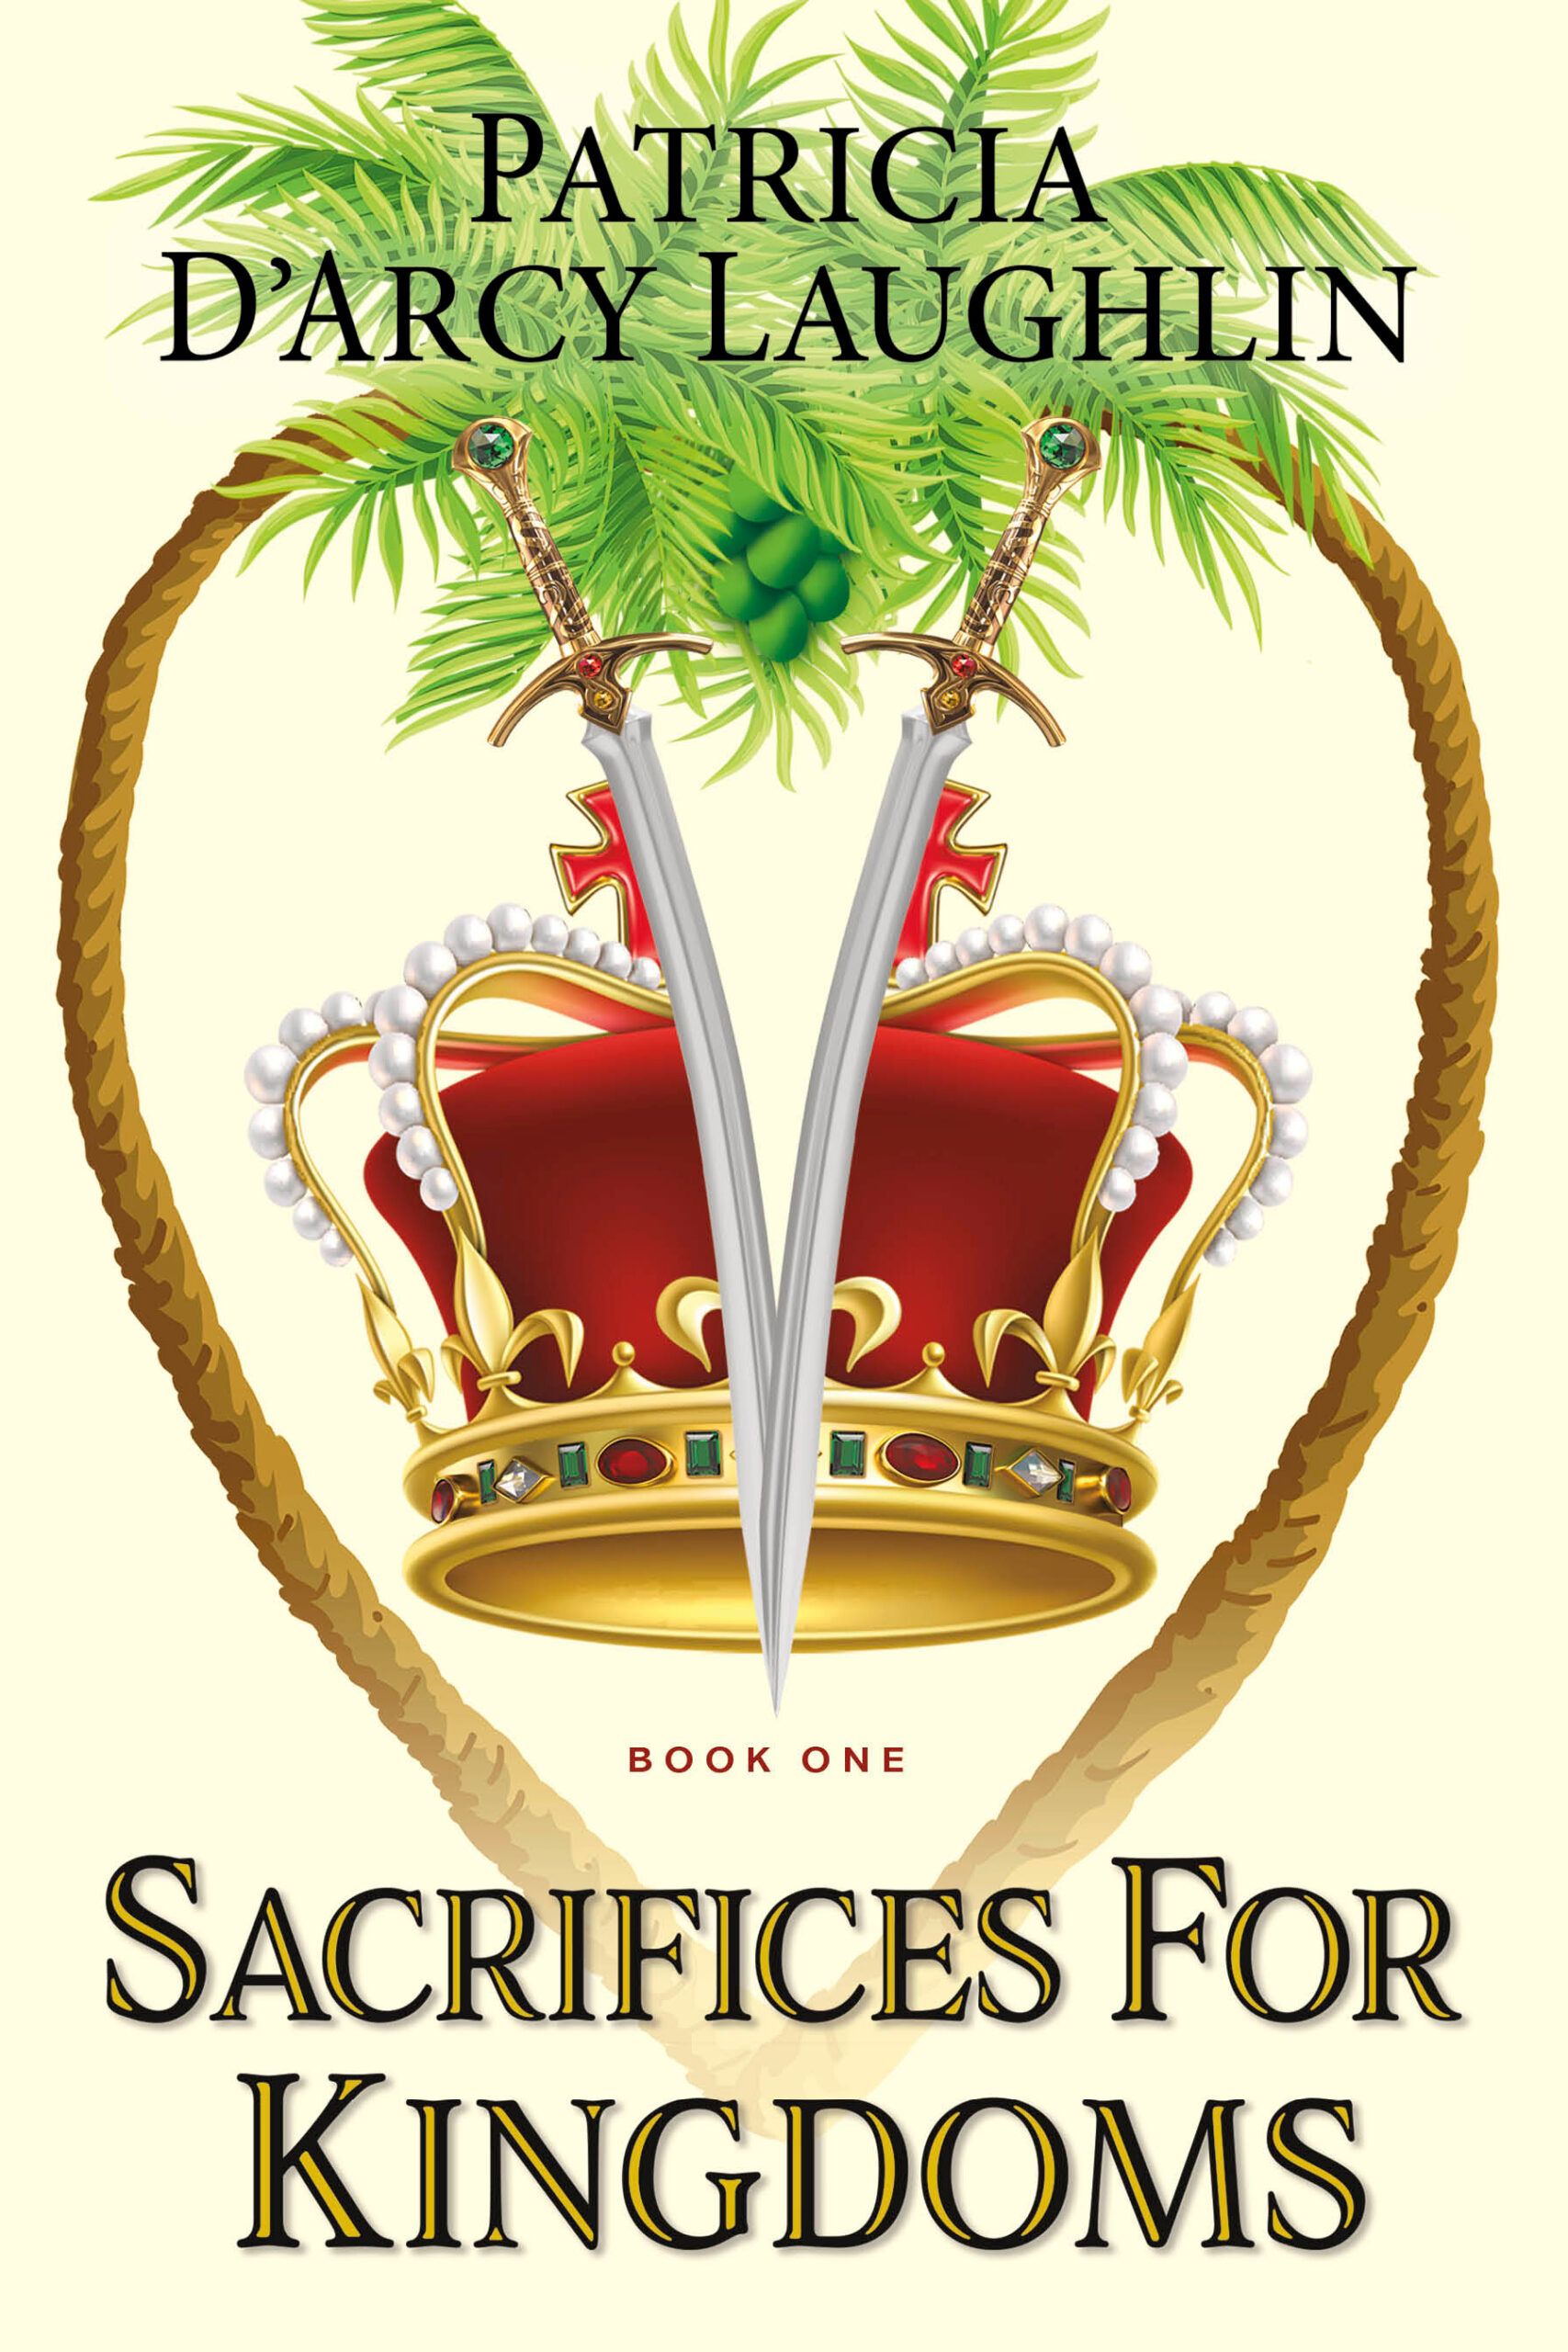 Download Sacrifices For Kingdoms PDF by Patricia D'Arcy Laughlin